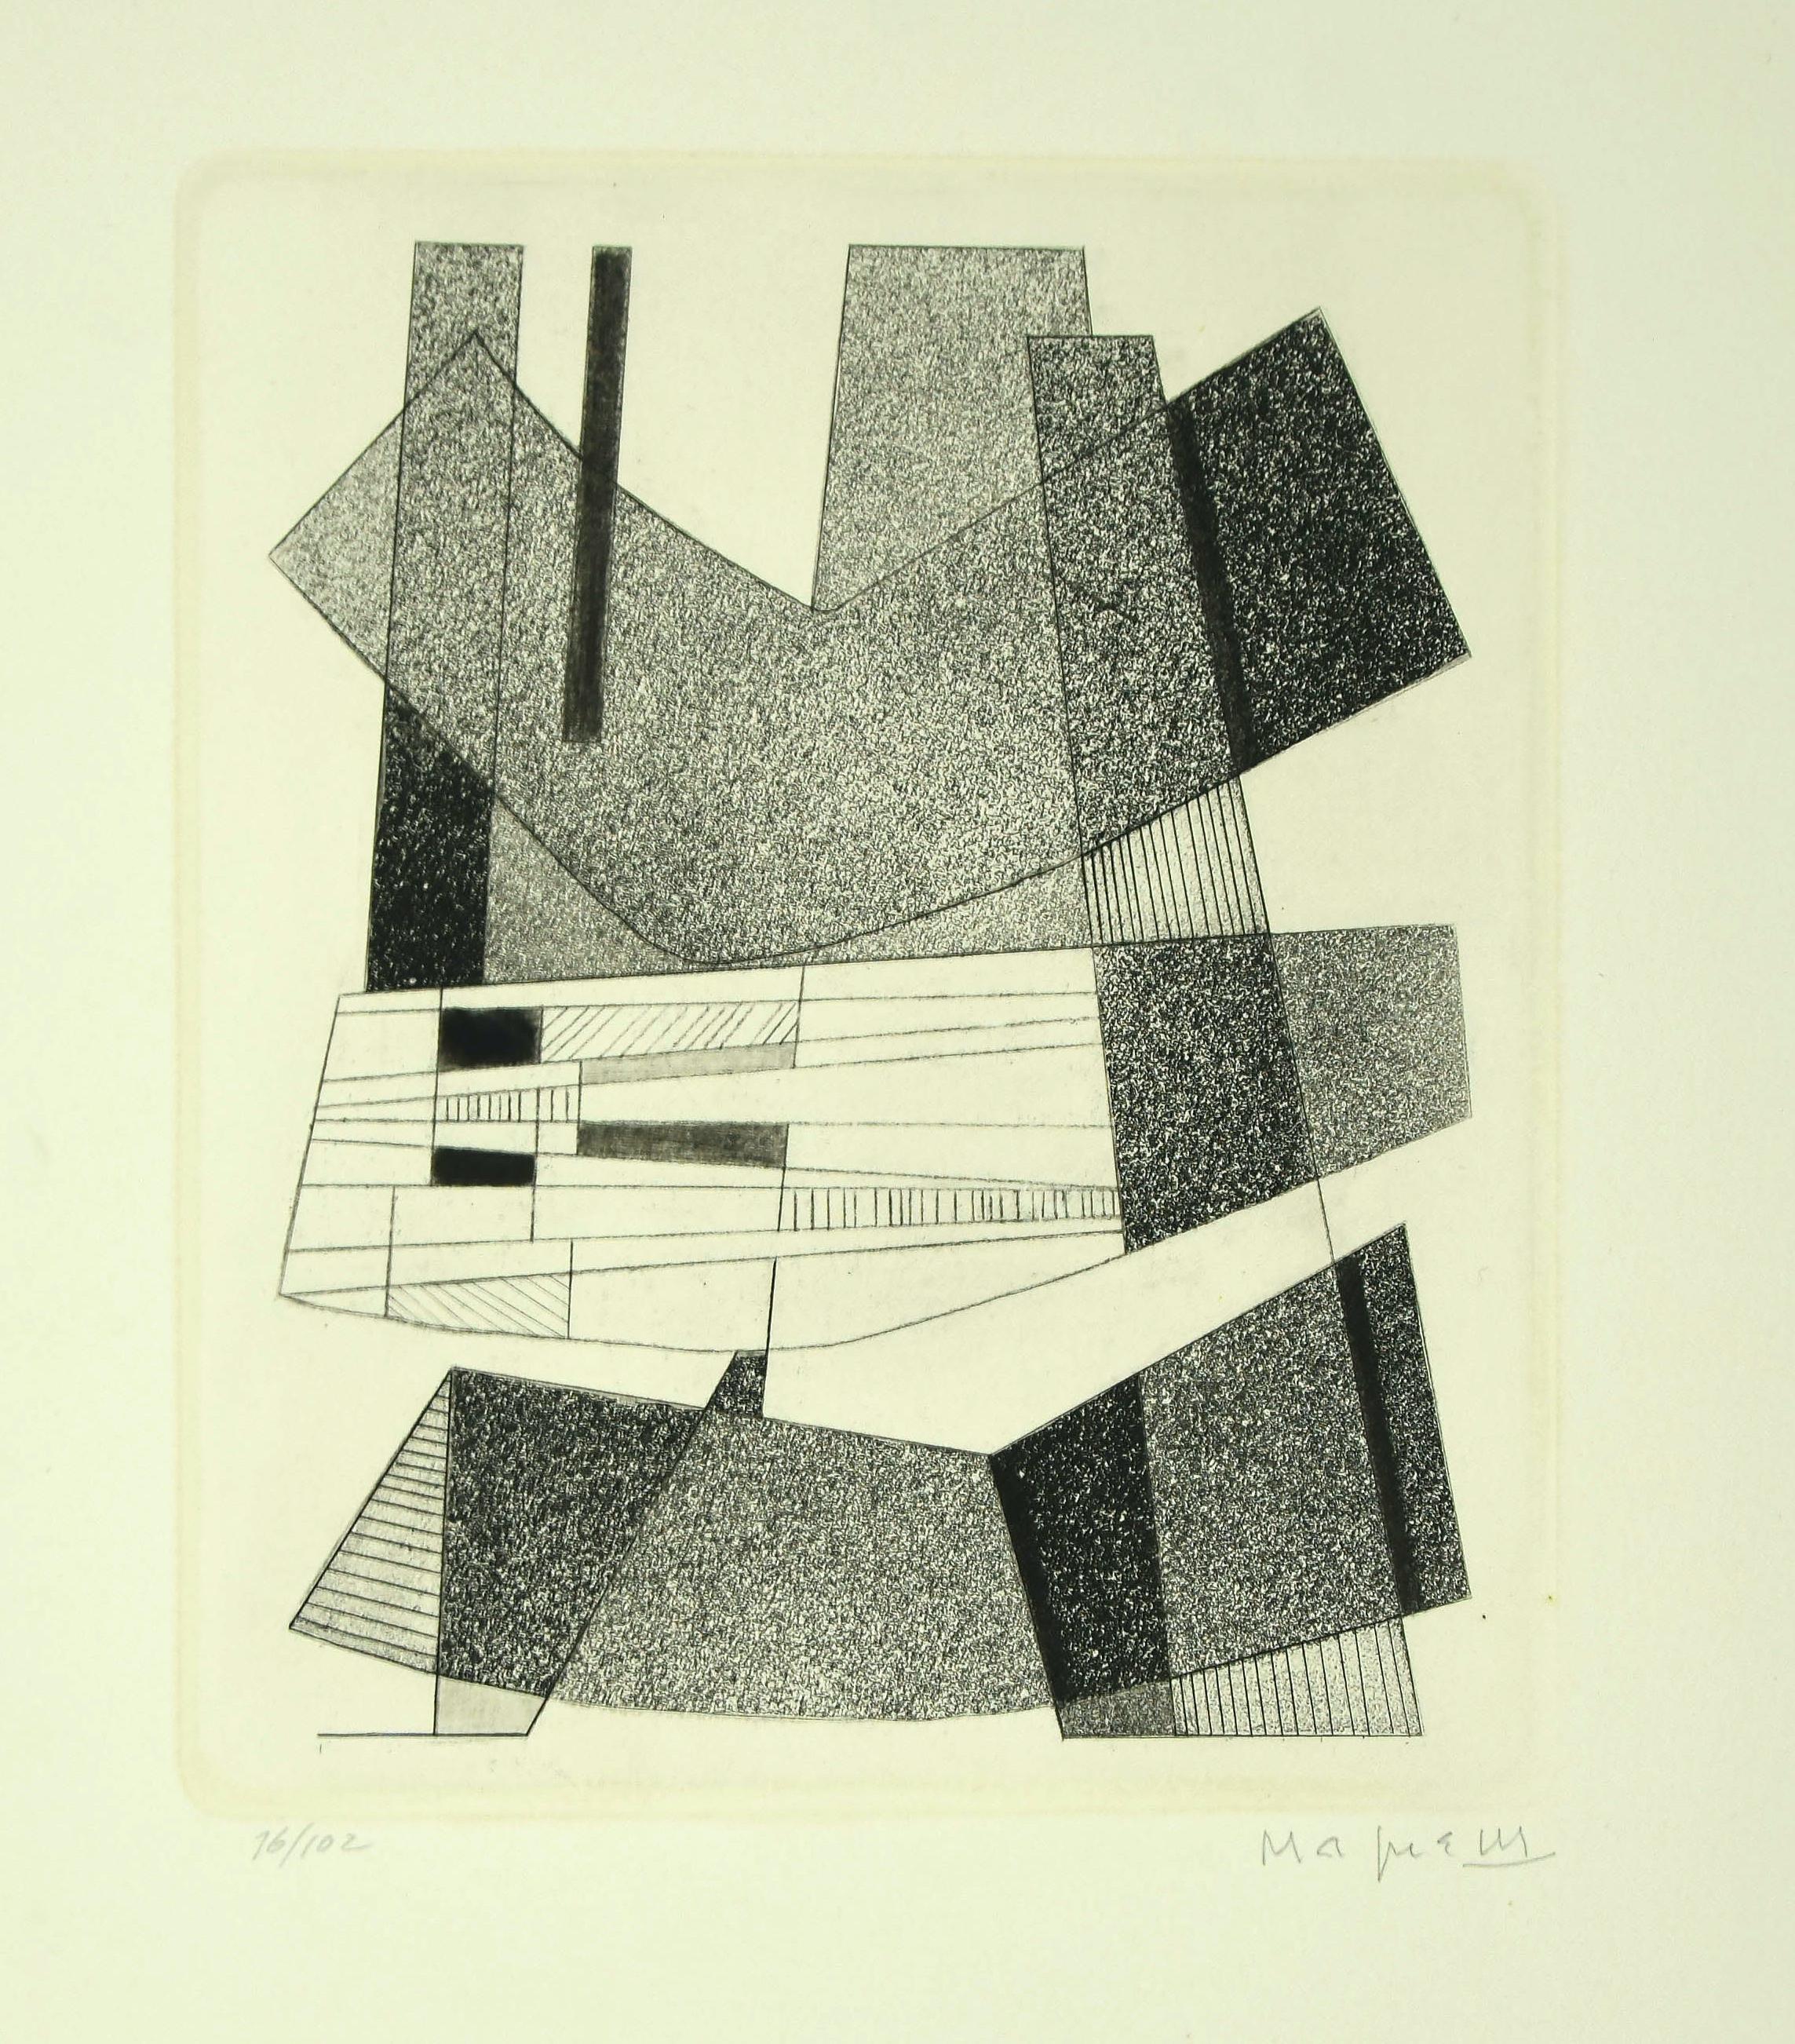 Alberto Magnelli Abstract Print - Geometric Black and White - Original Etching by A. Magnelli - 1964